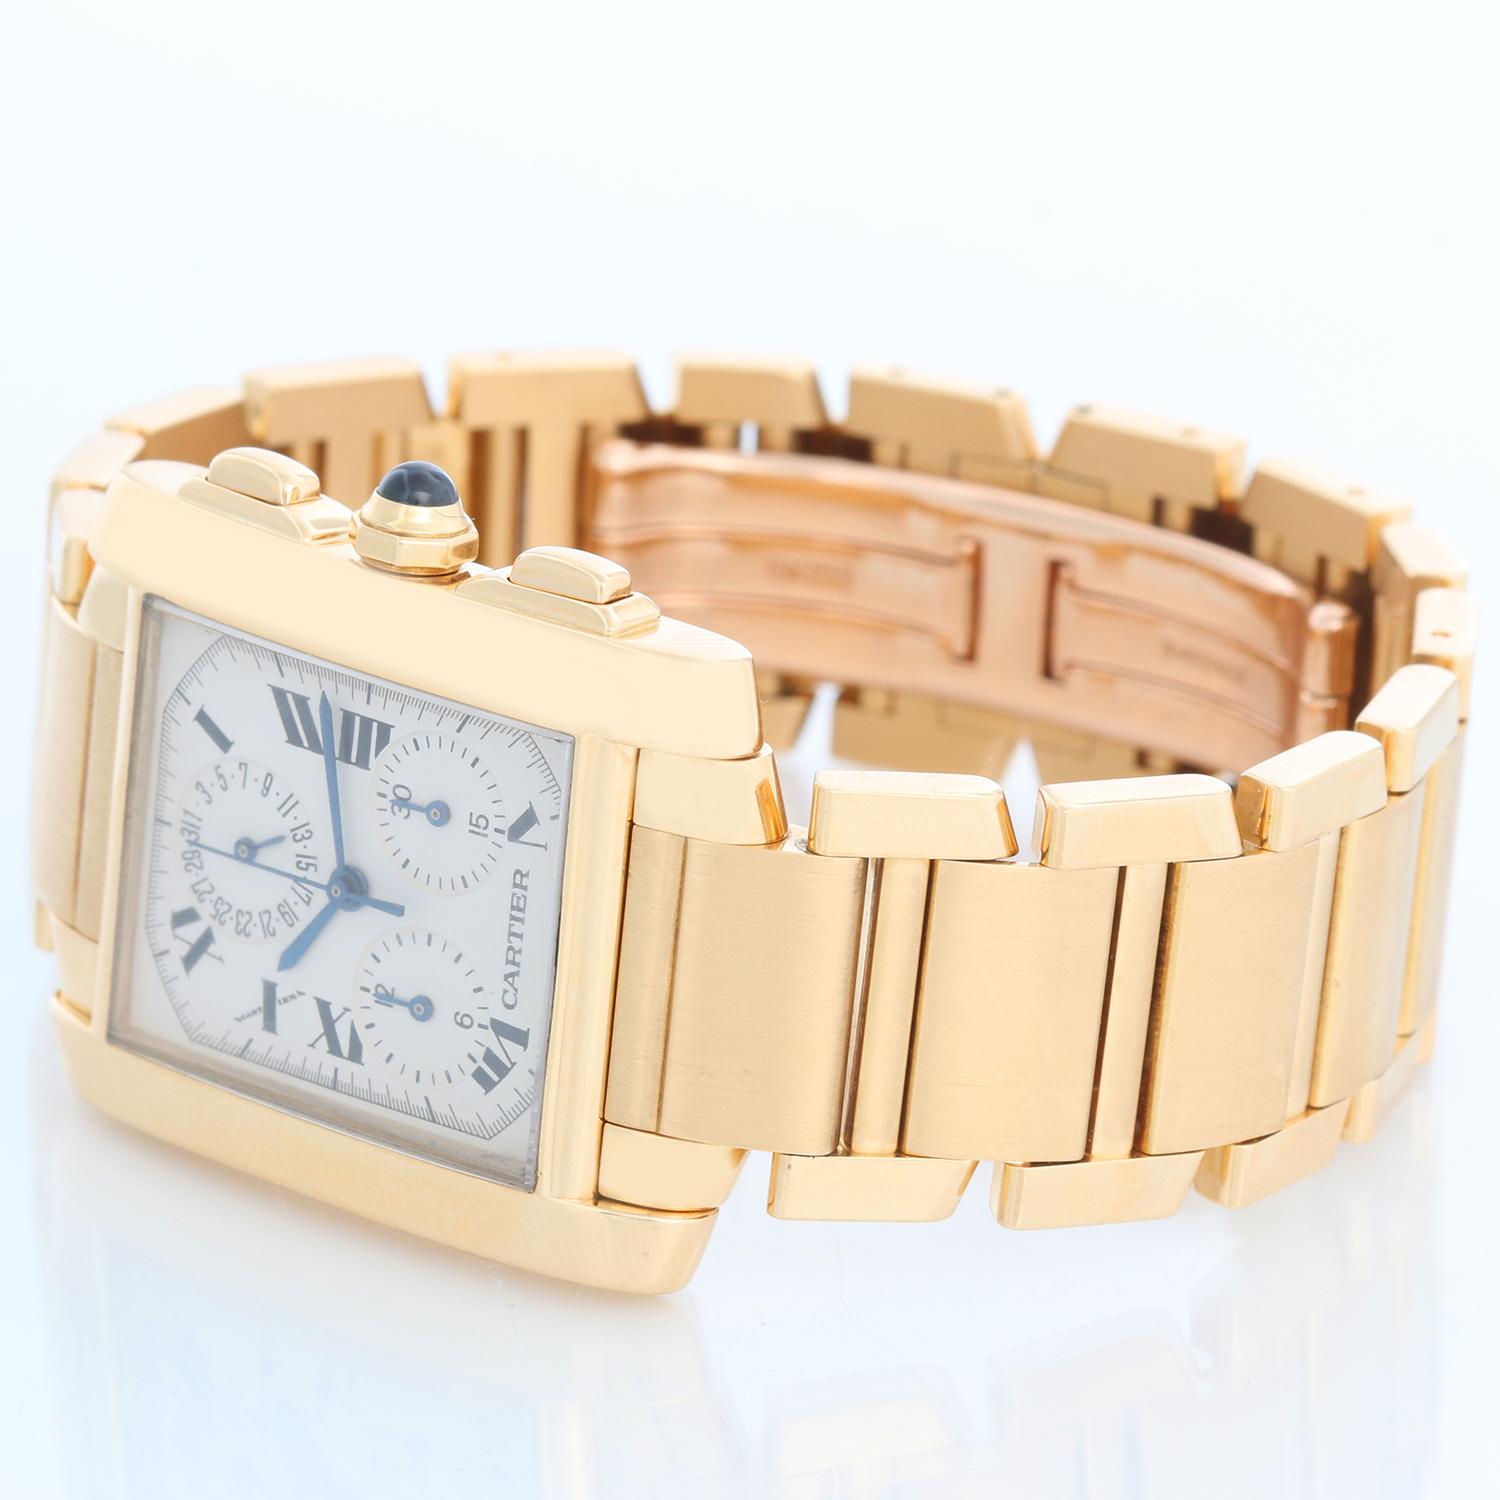 Cartier Tank Francaise Chronograph Men's 18k Gold Watch  W5000556 - Quartz chronograph with date. 18k yellow gold case (28mm x 36mm). Ivory colored dial with hours, minutes and seconds; black Roman numerals. 18K Yellow Gold Cartier Bracelet; fits a